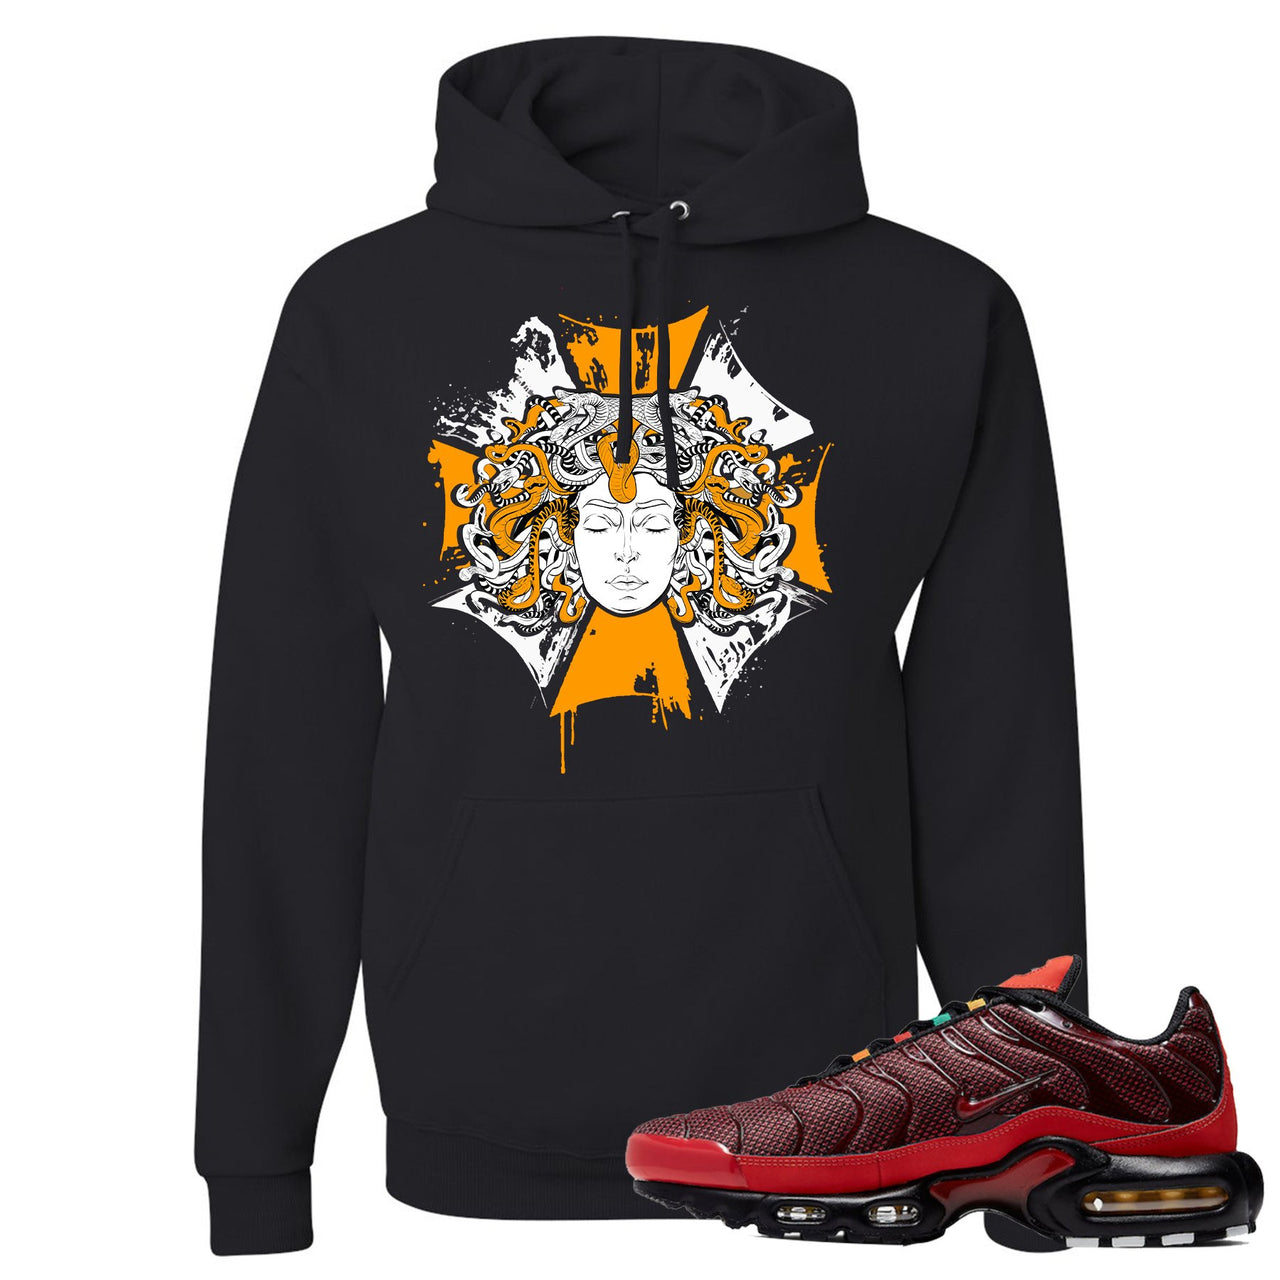 Printed on the front of the air max plus sunburst sneaker matching black pullover hoodie is the medusa sunburst logo